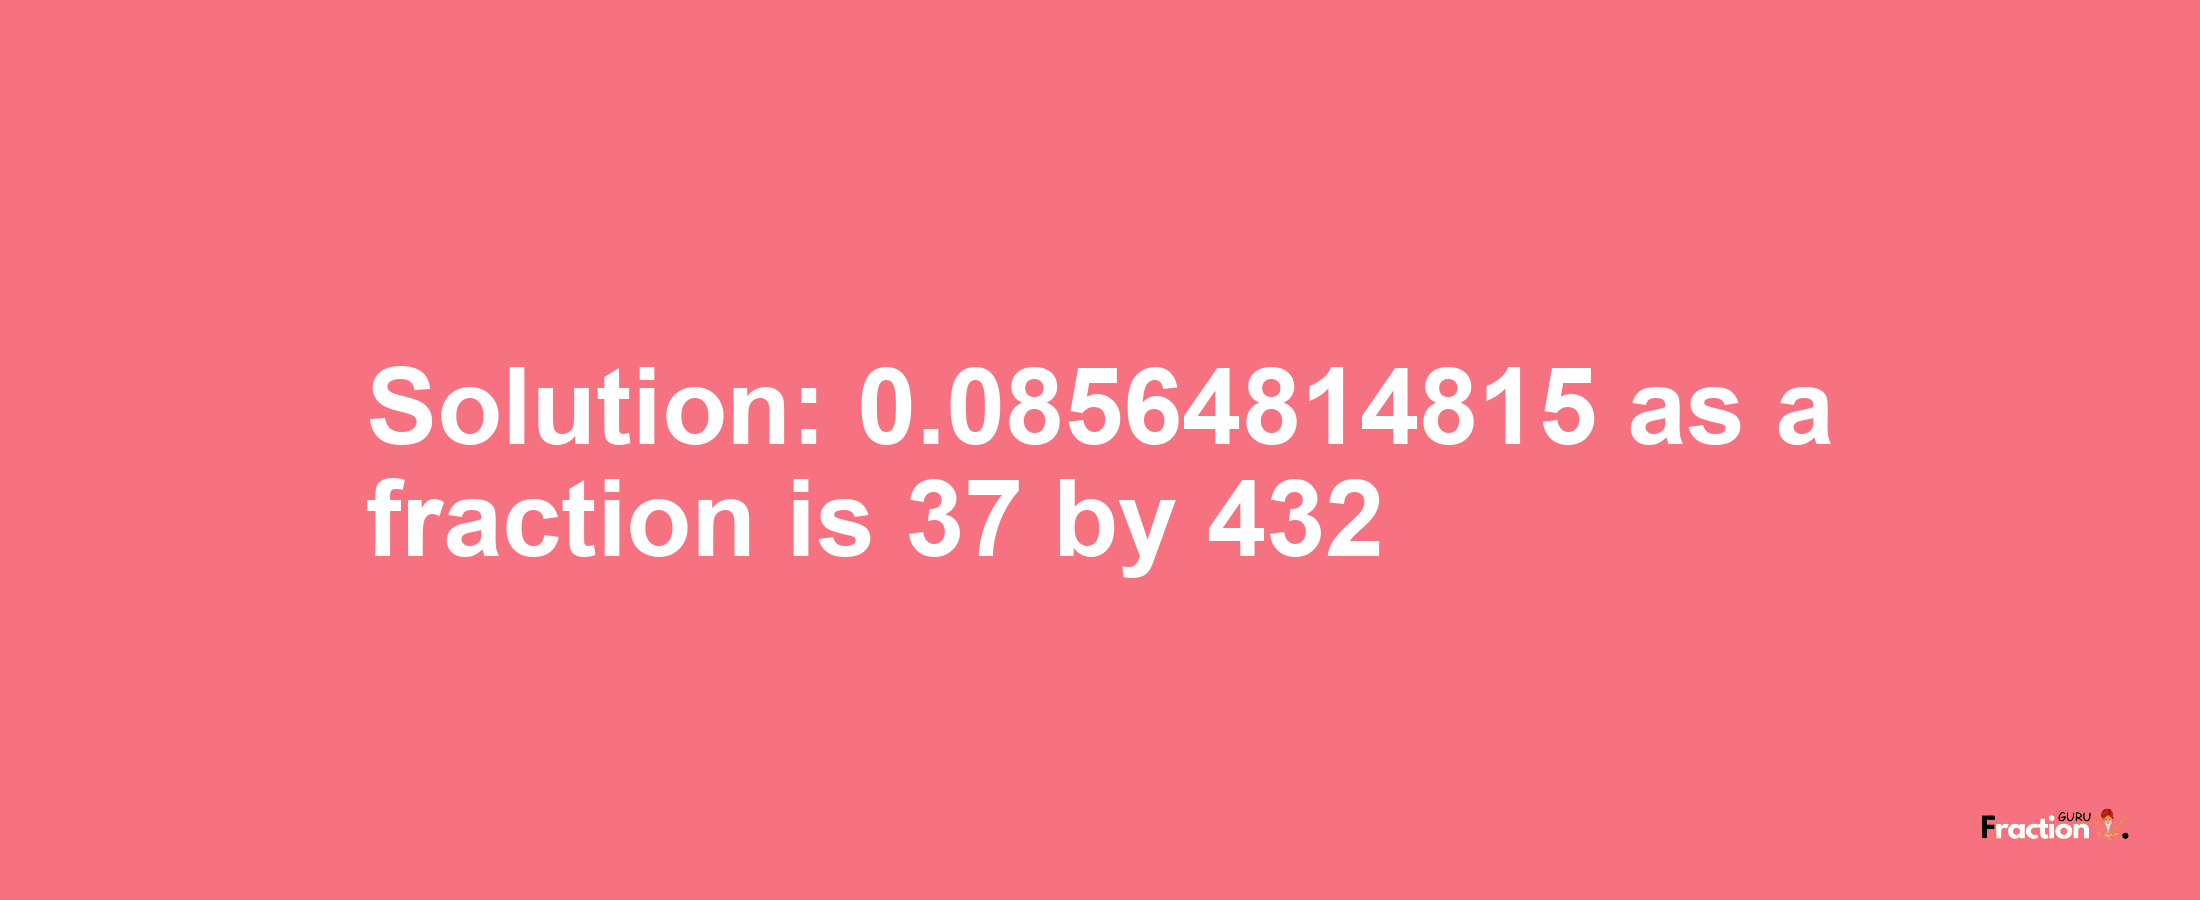 Solution:0.08564814815 as a fraction is 37/432